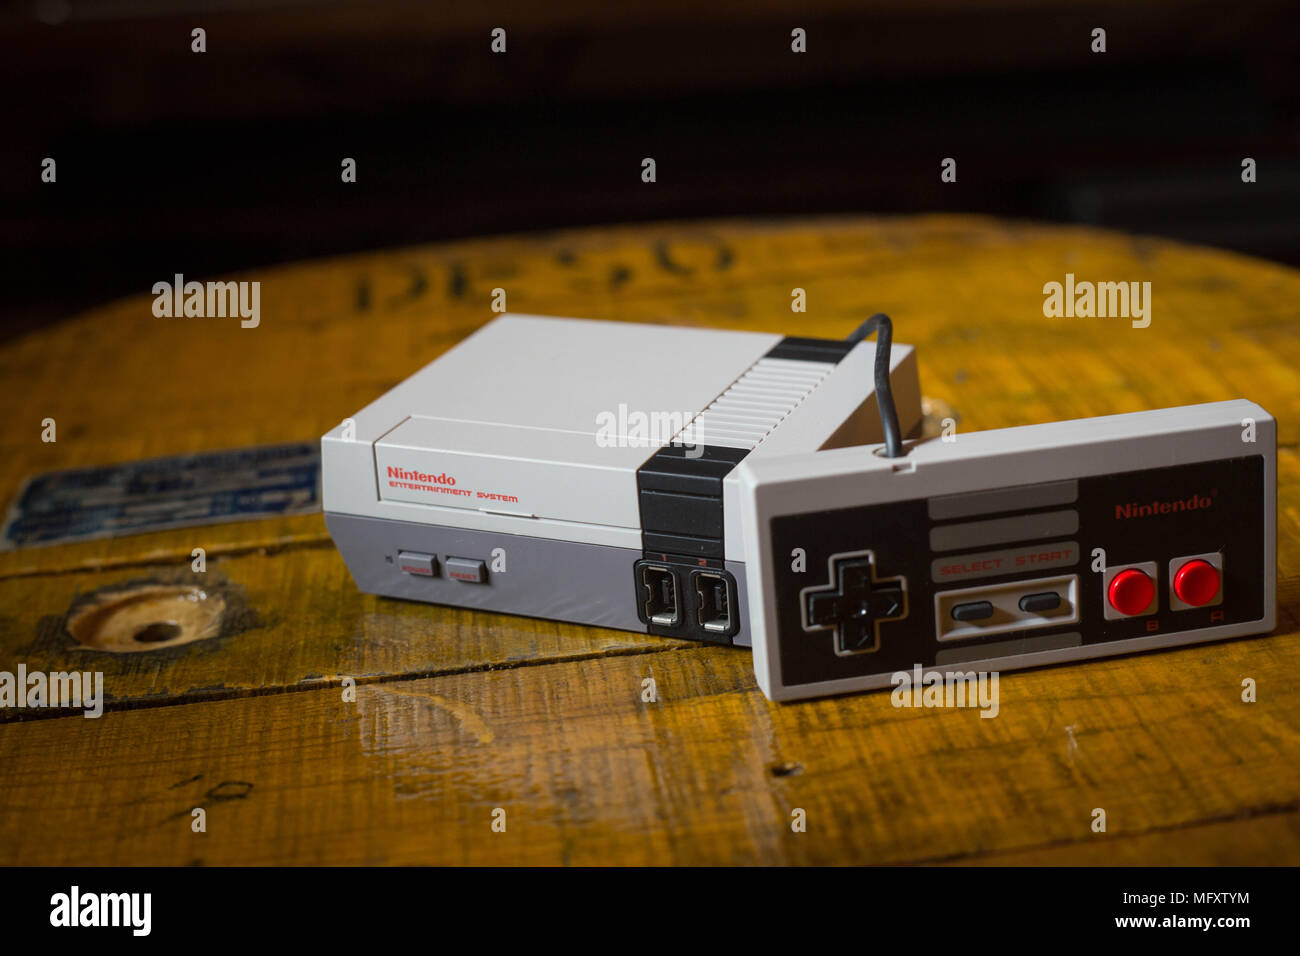 A Nintendo Classic Mini 'Nintendo Entertainment System' video game console with a controller. The Kyoto based video game company Nintendo ended it’s comeback year revenue with worth $9 Billion after a glorious year 2017 notably with the launch of the hybrid console the Nintendo Switch, mini retro vintage game consoles such as the Nintendo Entertainment System and Super Nintendo as well as its mobile phone video games. Stock Photo